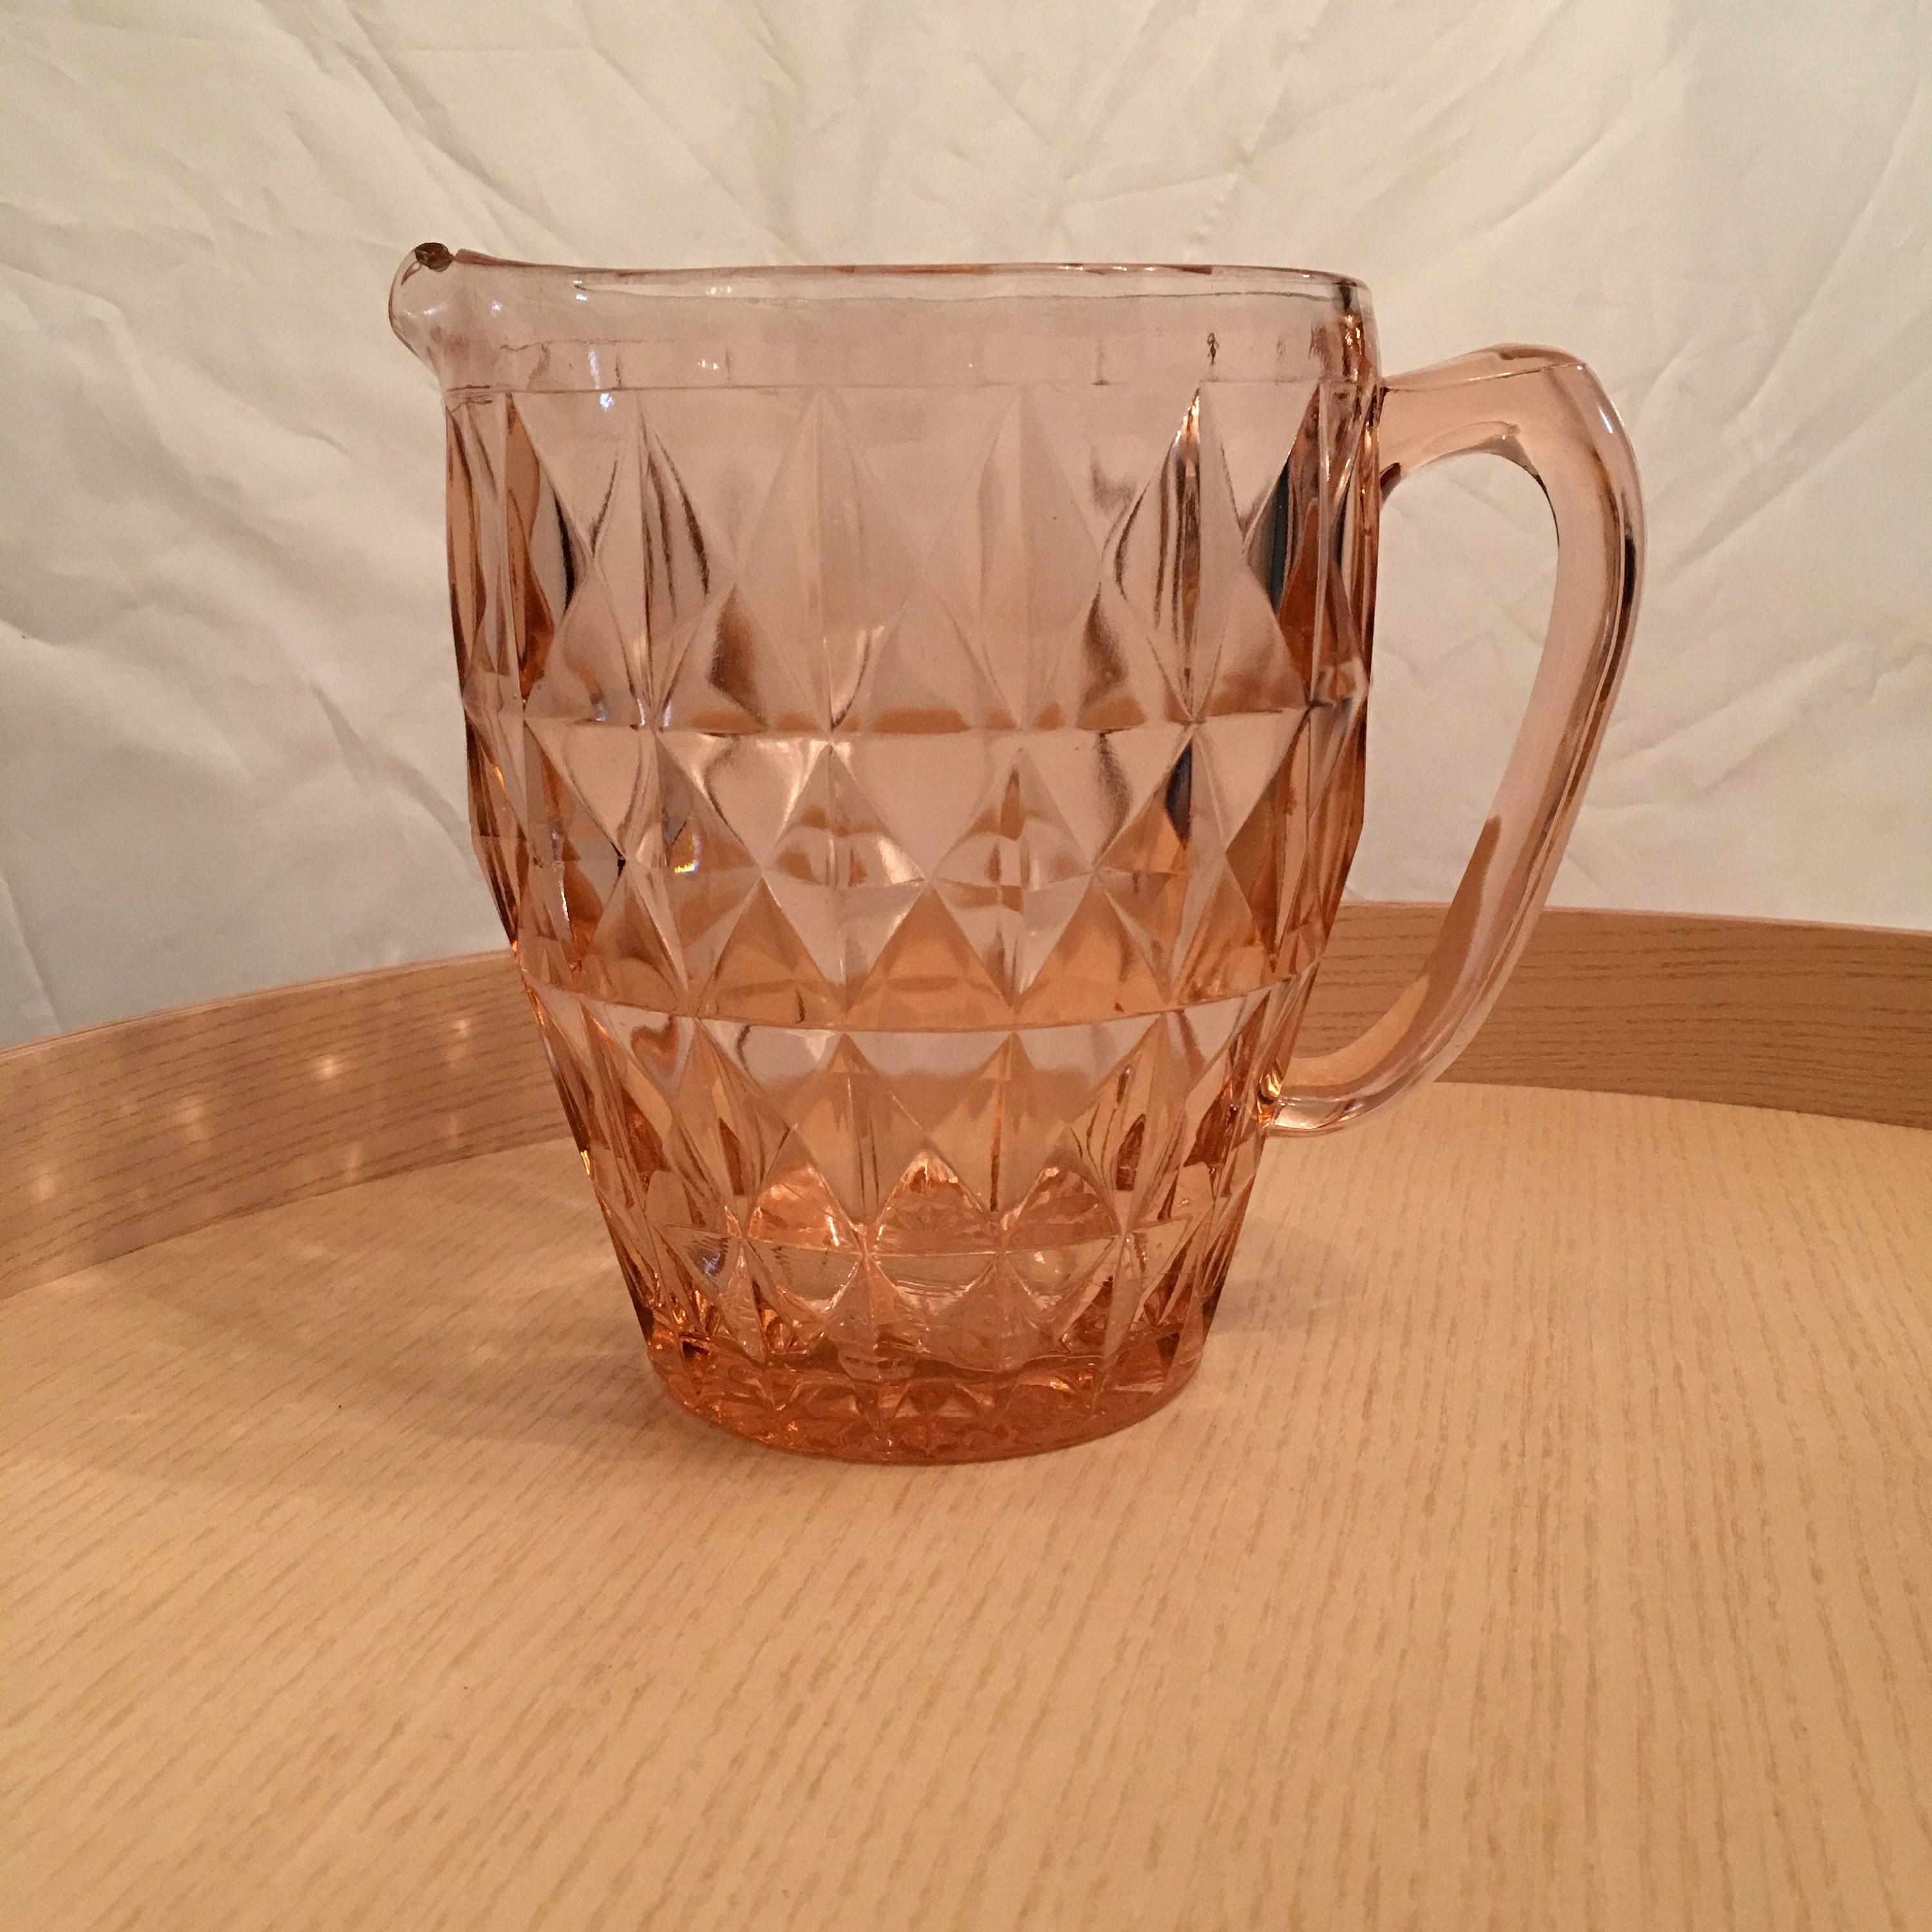 26 Perfect Cut Glass Vase 2024 free download cut glass vase of depression glass jeannette windsor diamond pitcher vase large pink throughout depression glass jeannette windsor diamond pitcher large pink glass pitcher vintage diamond cu